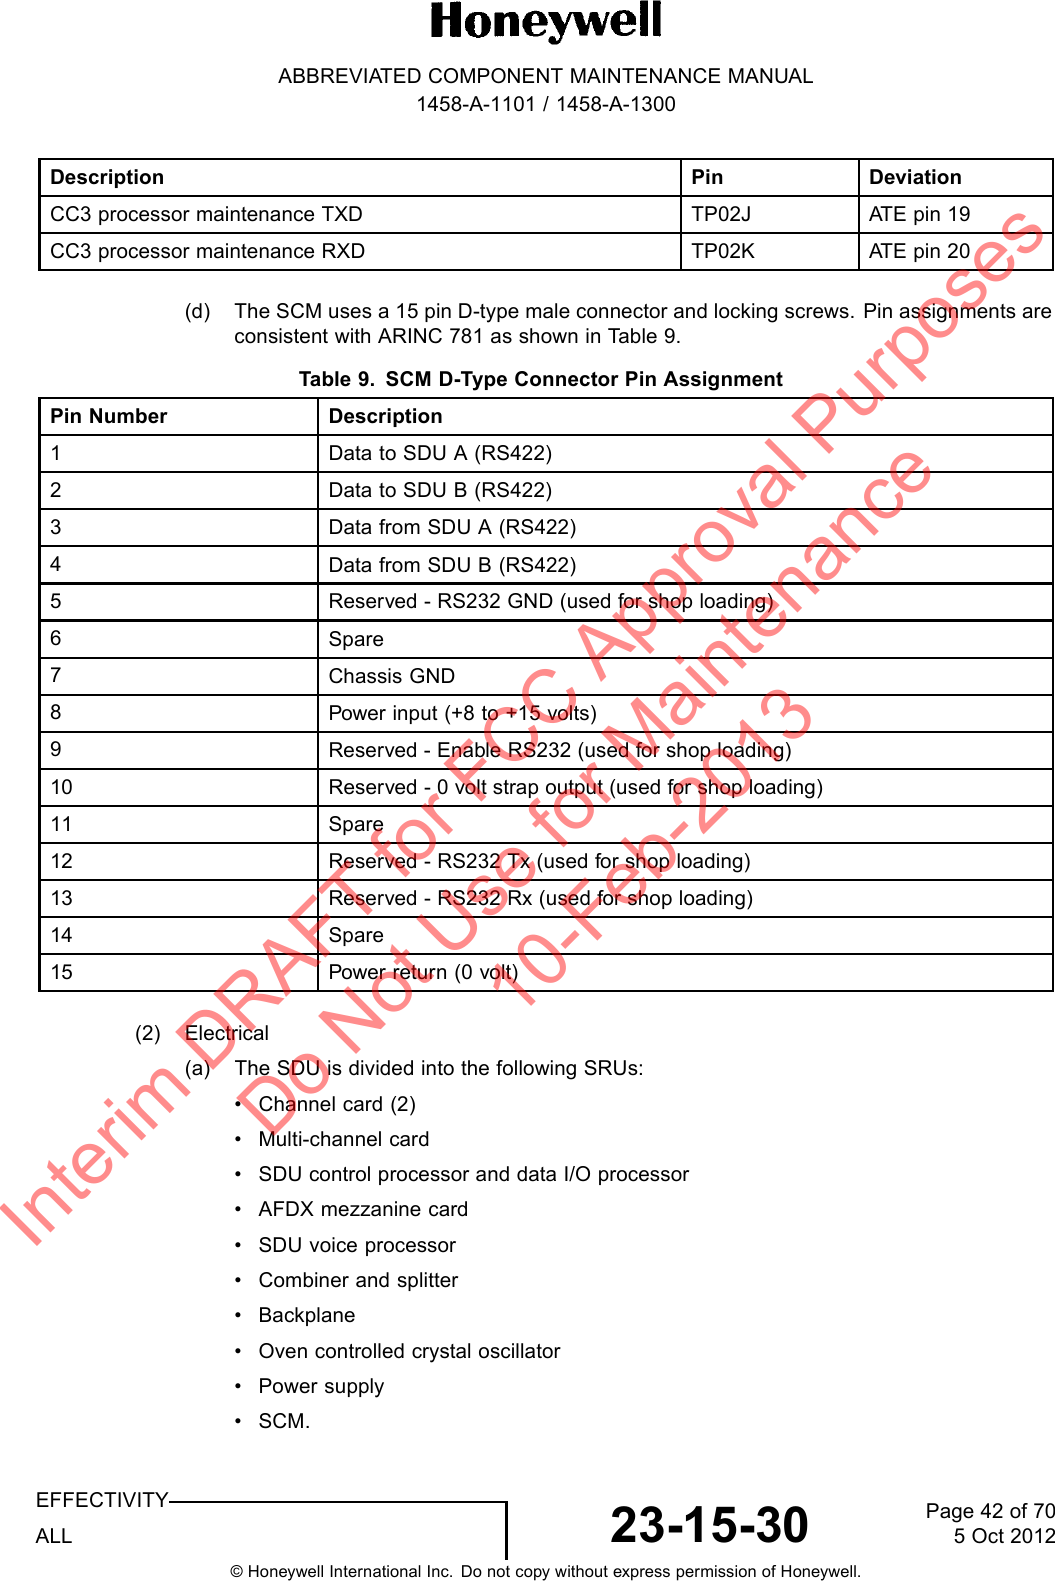 ABBREVIATED COMPONENT MAINTENANCE MANUAL1458-A-1101 / 1458-A-1300Description Pin DeviationCC3 processor maintenance TXD TP02J AT E p i n 1 9CC3 processor maintenance RXD TP02K AT E p i n 2 0(d) The SCM uses a 15 pin D-type male connector and locking screws. Pin assignments areconsistent with ARINC 781 as shown in Table 9.Table 9. SCM D-Type Connector Pin AssignmentPin Number Description1Data to SDU A (RS422)2Data to SDU B (RS422)3Data from SDU A (RS422)4Data from SDU B (RS422)5Reserved - RS232 GND (used for shop loading)6Spare7Chassis GND8Power input (+8 to +15 volts)9Reserved - Enable RS232 (used for shop loading)10 Reserved - 0 volt strap output (used for shop loading)11 Spare12 Reserved - RS232 Tx (used for shop loading)13 Reserved - RS232 Rx (used for shop loading)14 Spare15 Power return (0 volt)(2) Electrical(a) The SDU is divided into the following SRUs:• Channel card (2)• Multi-channel card• SDU control processor and data I/O processor• AFDX mezzanine card• SDU voice processor• Combiner and splitter• Backplane• Oven controlled crystal oscillator• Power supply•SCM.EFFECTIVITYALL 23-15-30 Page 42 of 705 Oct 2012© Honeywell International Inc. Do not copy without express permission of Honeywell.Interim DRAFT for FCC Approval Purposes Do Not Use for Maintenance 10-Feb-2013